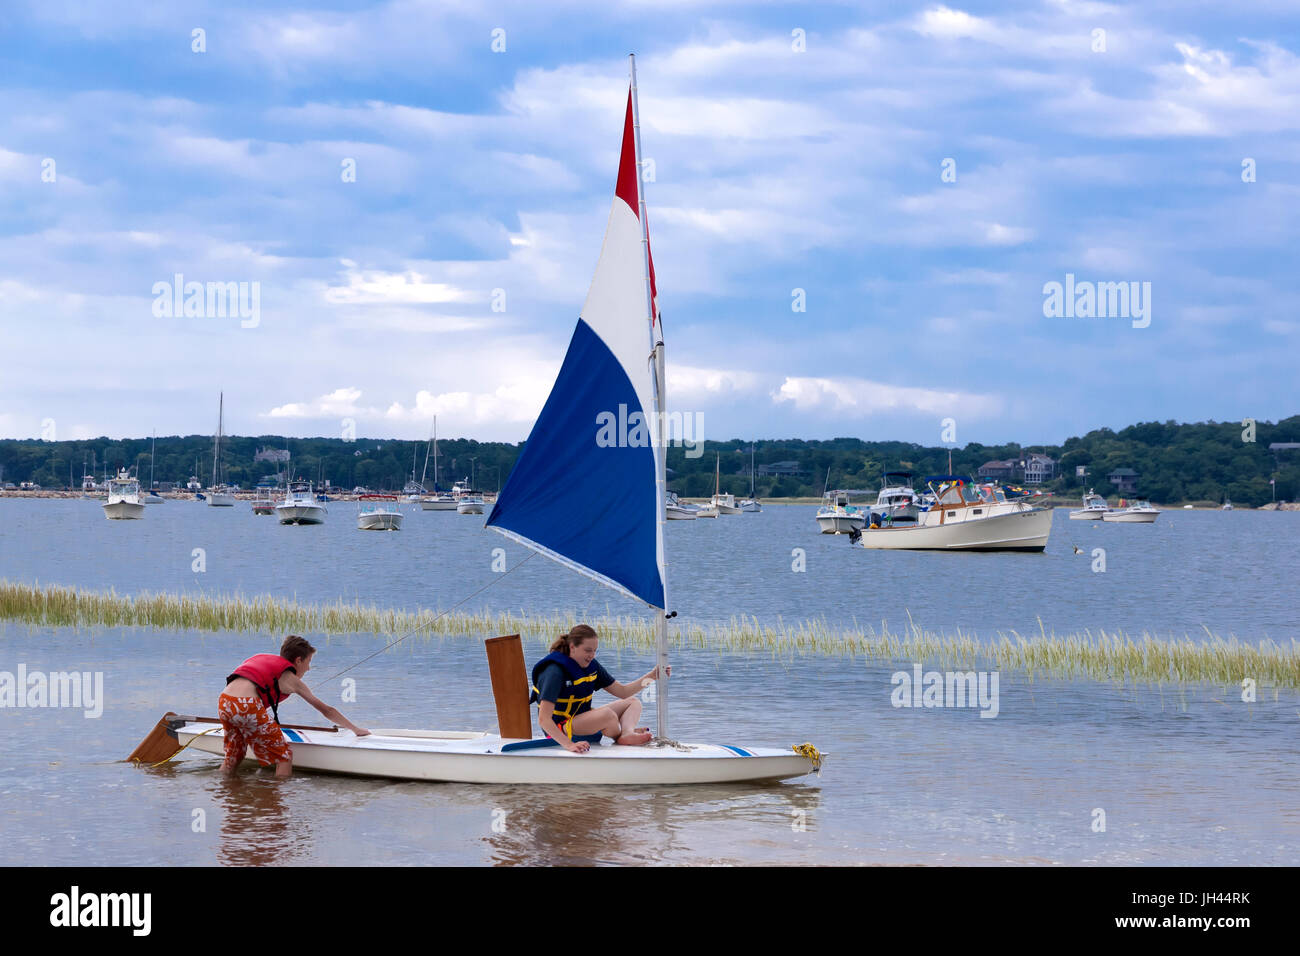 Young teens on sailboat. Stock Photo